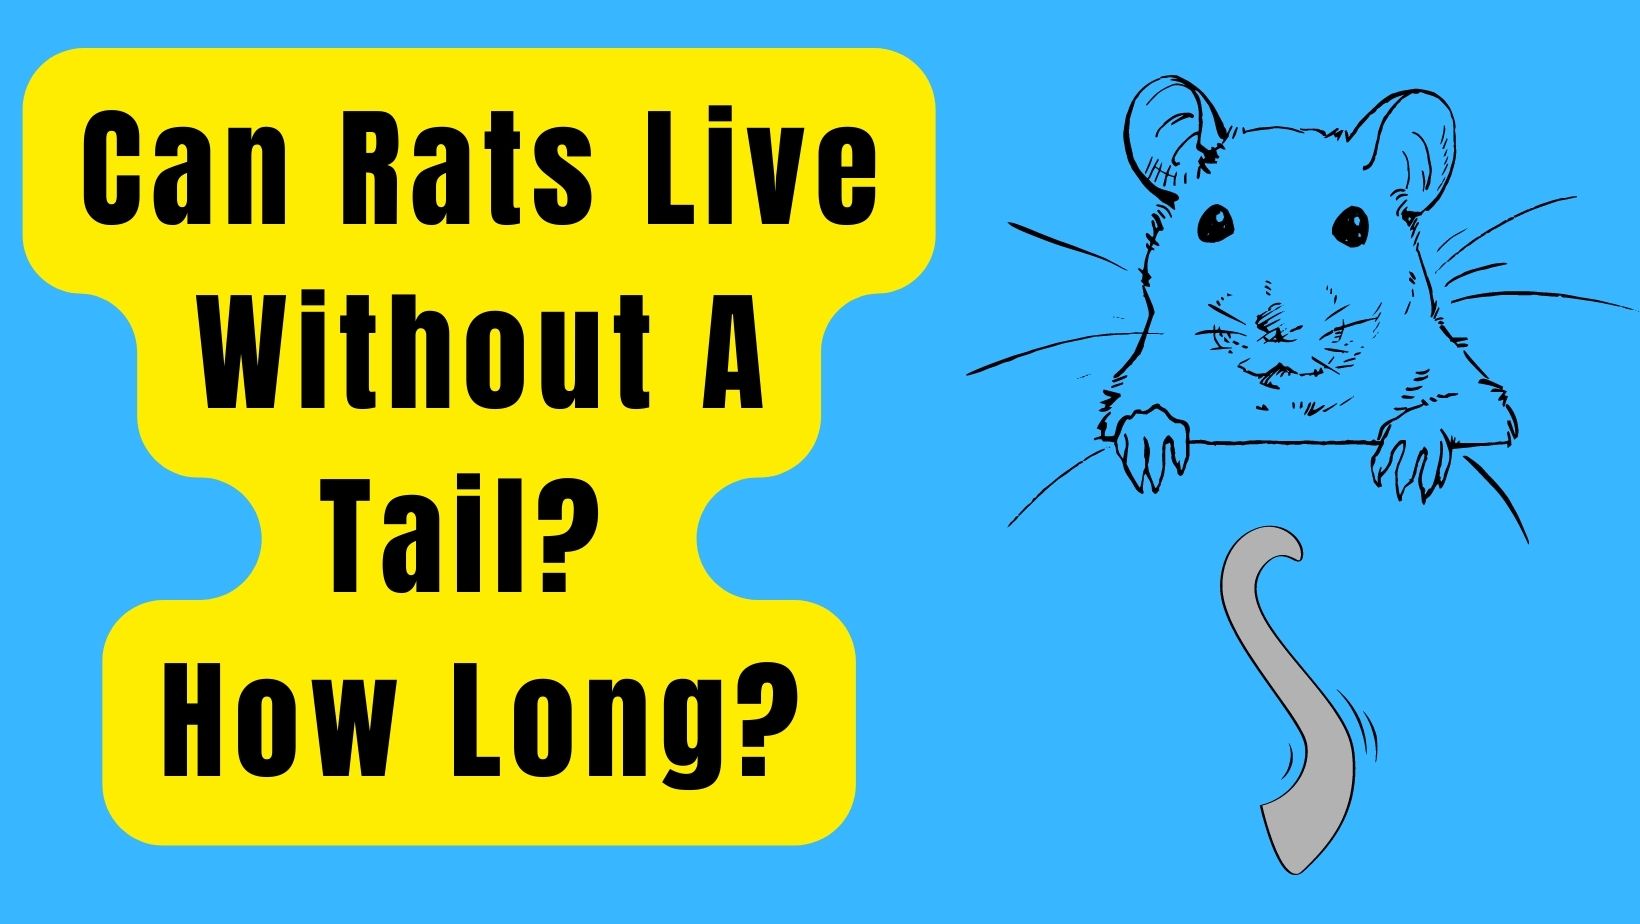 Can Rats Live Without a Tail? How Long?